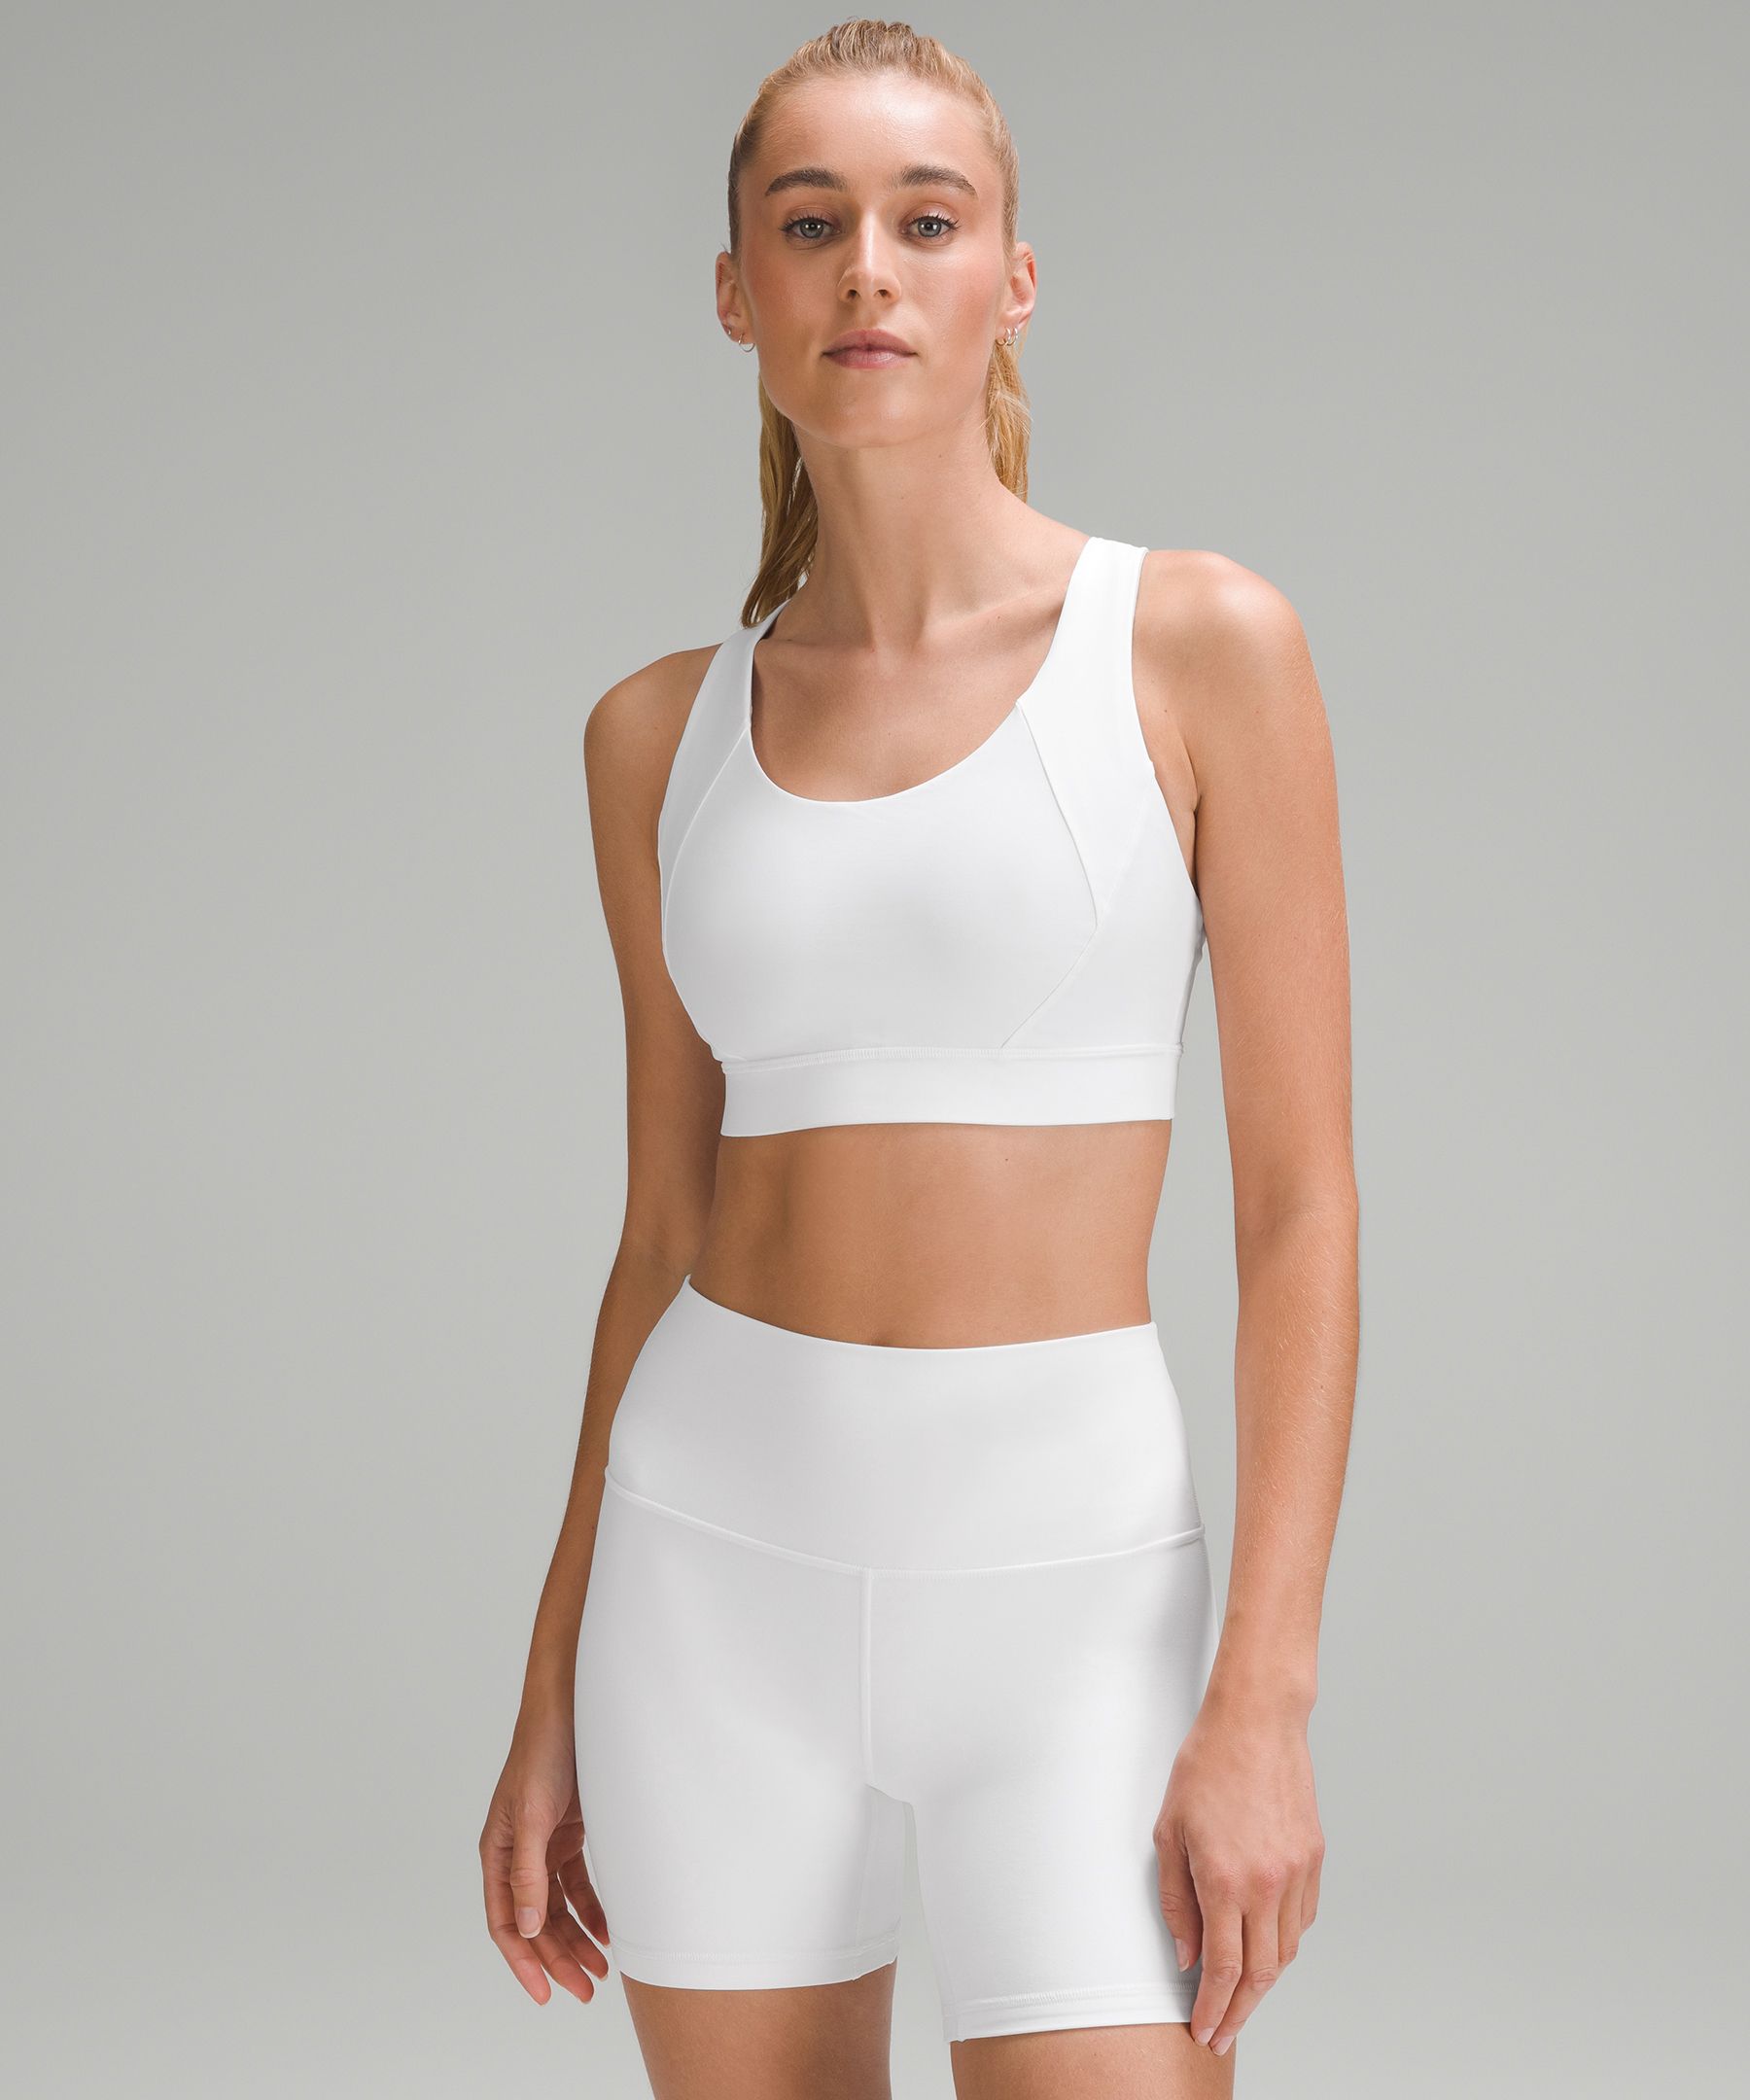 Lululemon Free To Be Elevated Bra Light Support, Dd/ddd(e) Cup In White